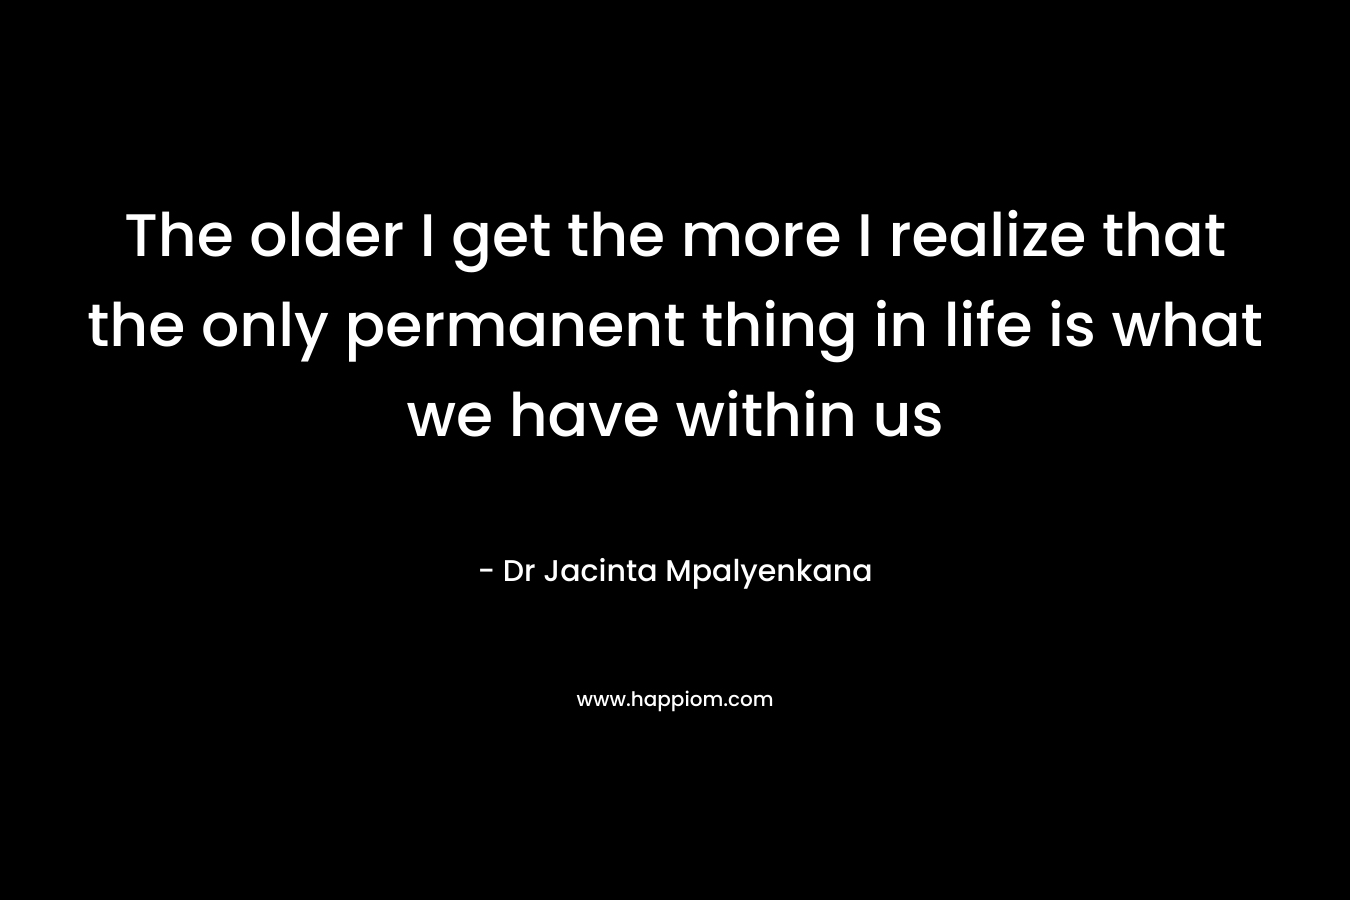 The older I get the more I realize that the only permanent thing in life is what we have within us